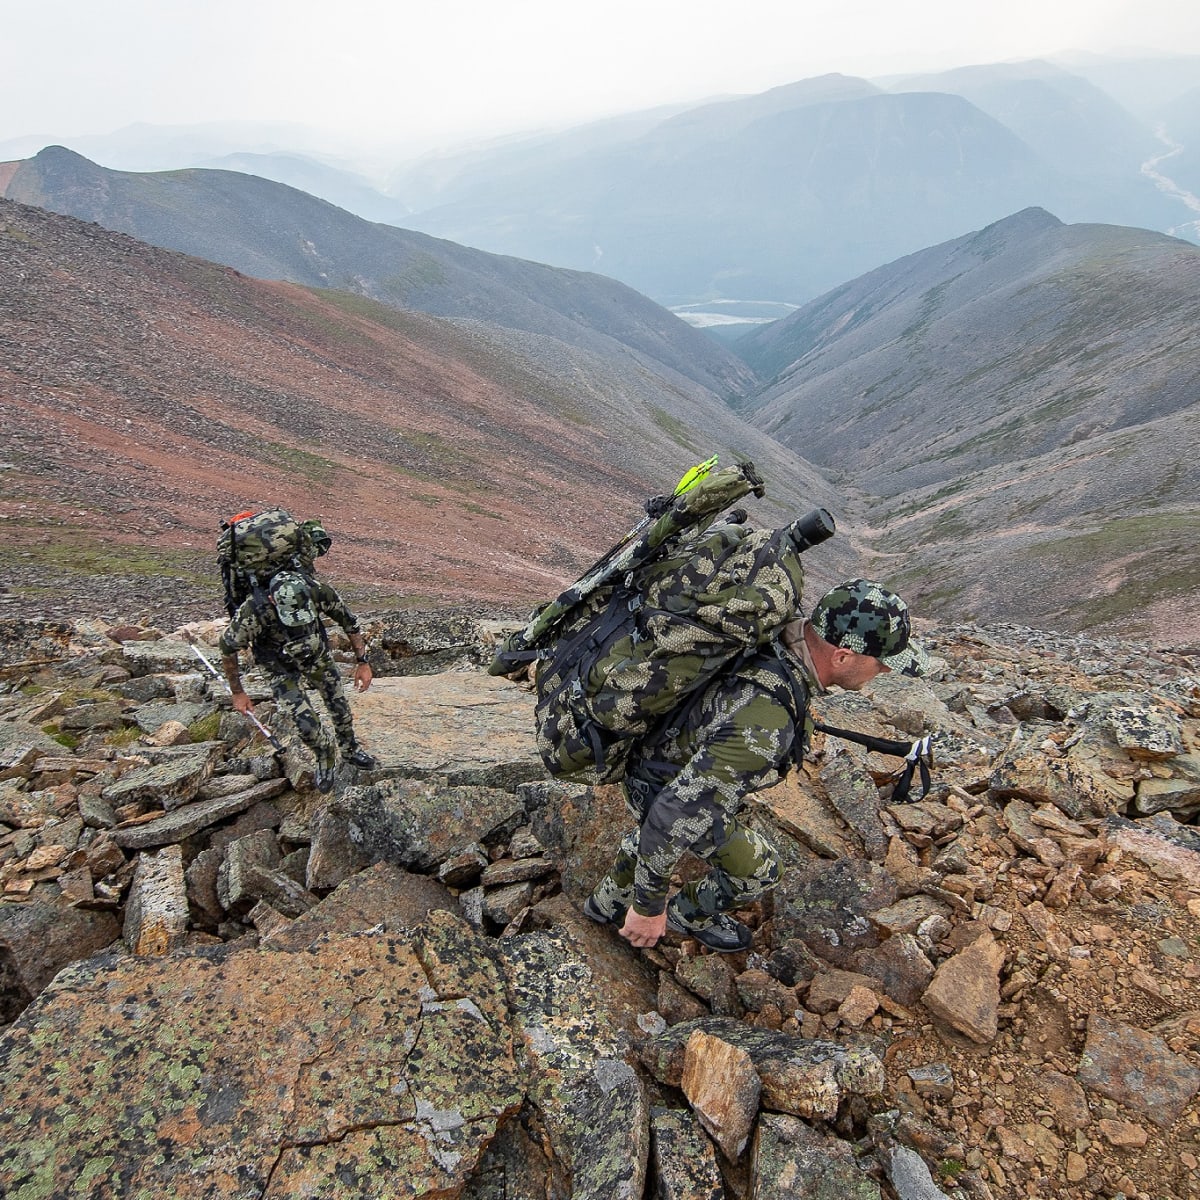 KUIU is Changing the Technical Mountain Apparel Game